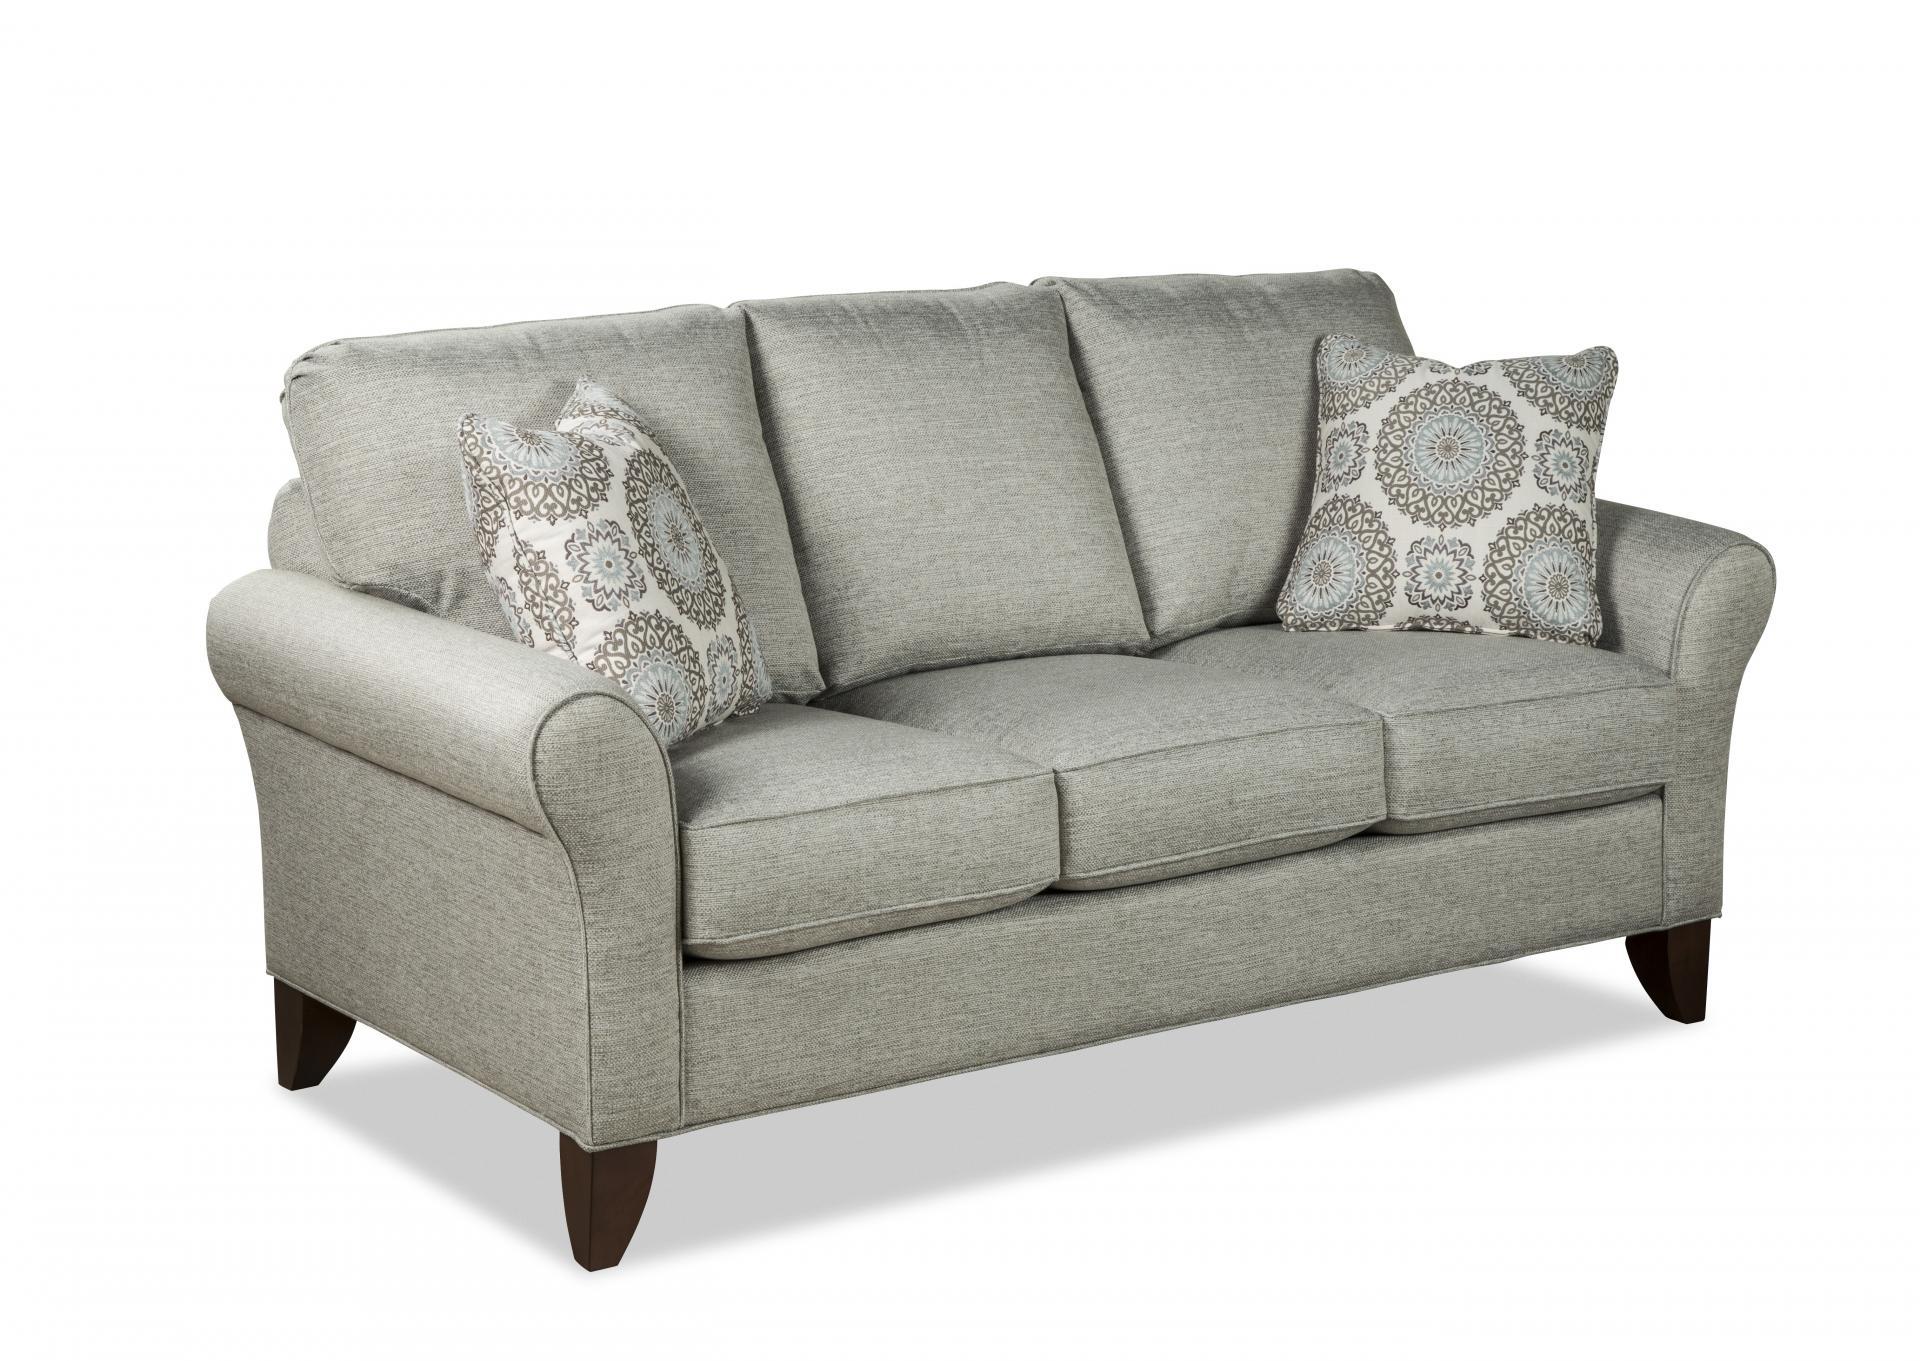 Craftmaster Townhouse 41 Quickship Sofa,Penland's House Brand